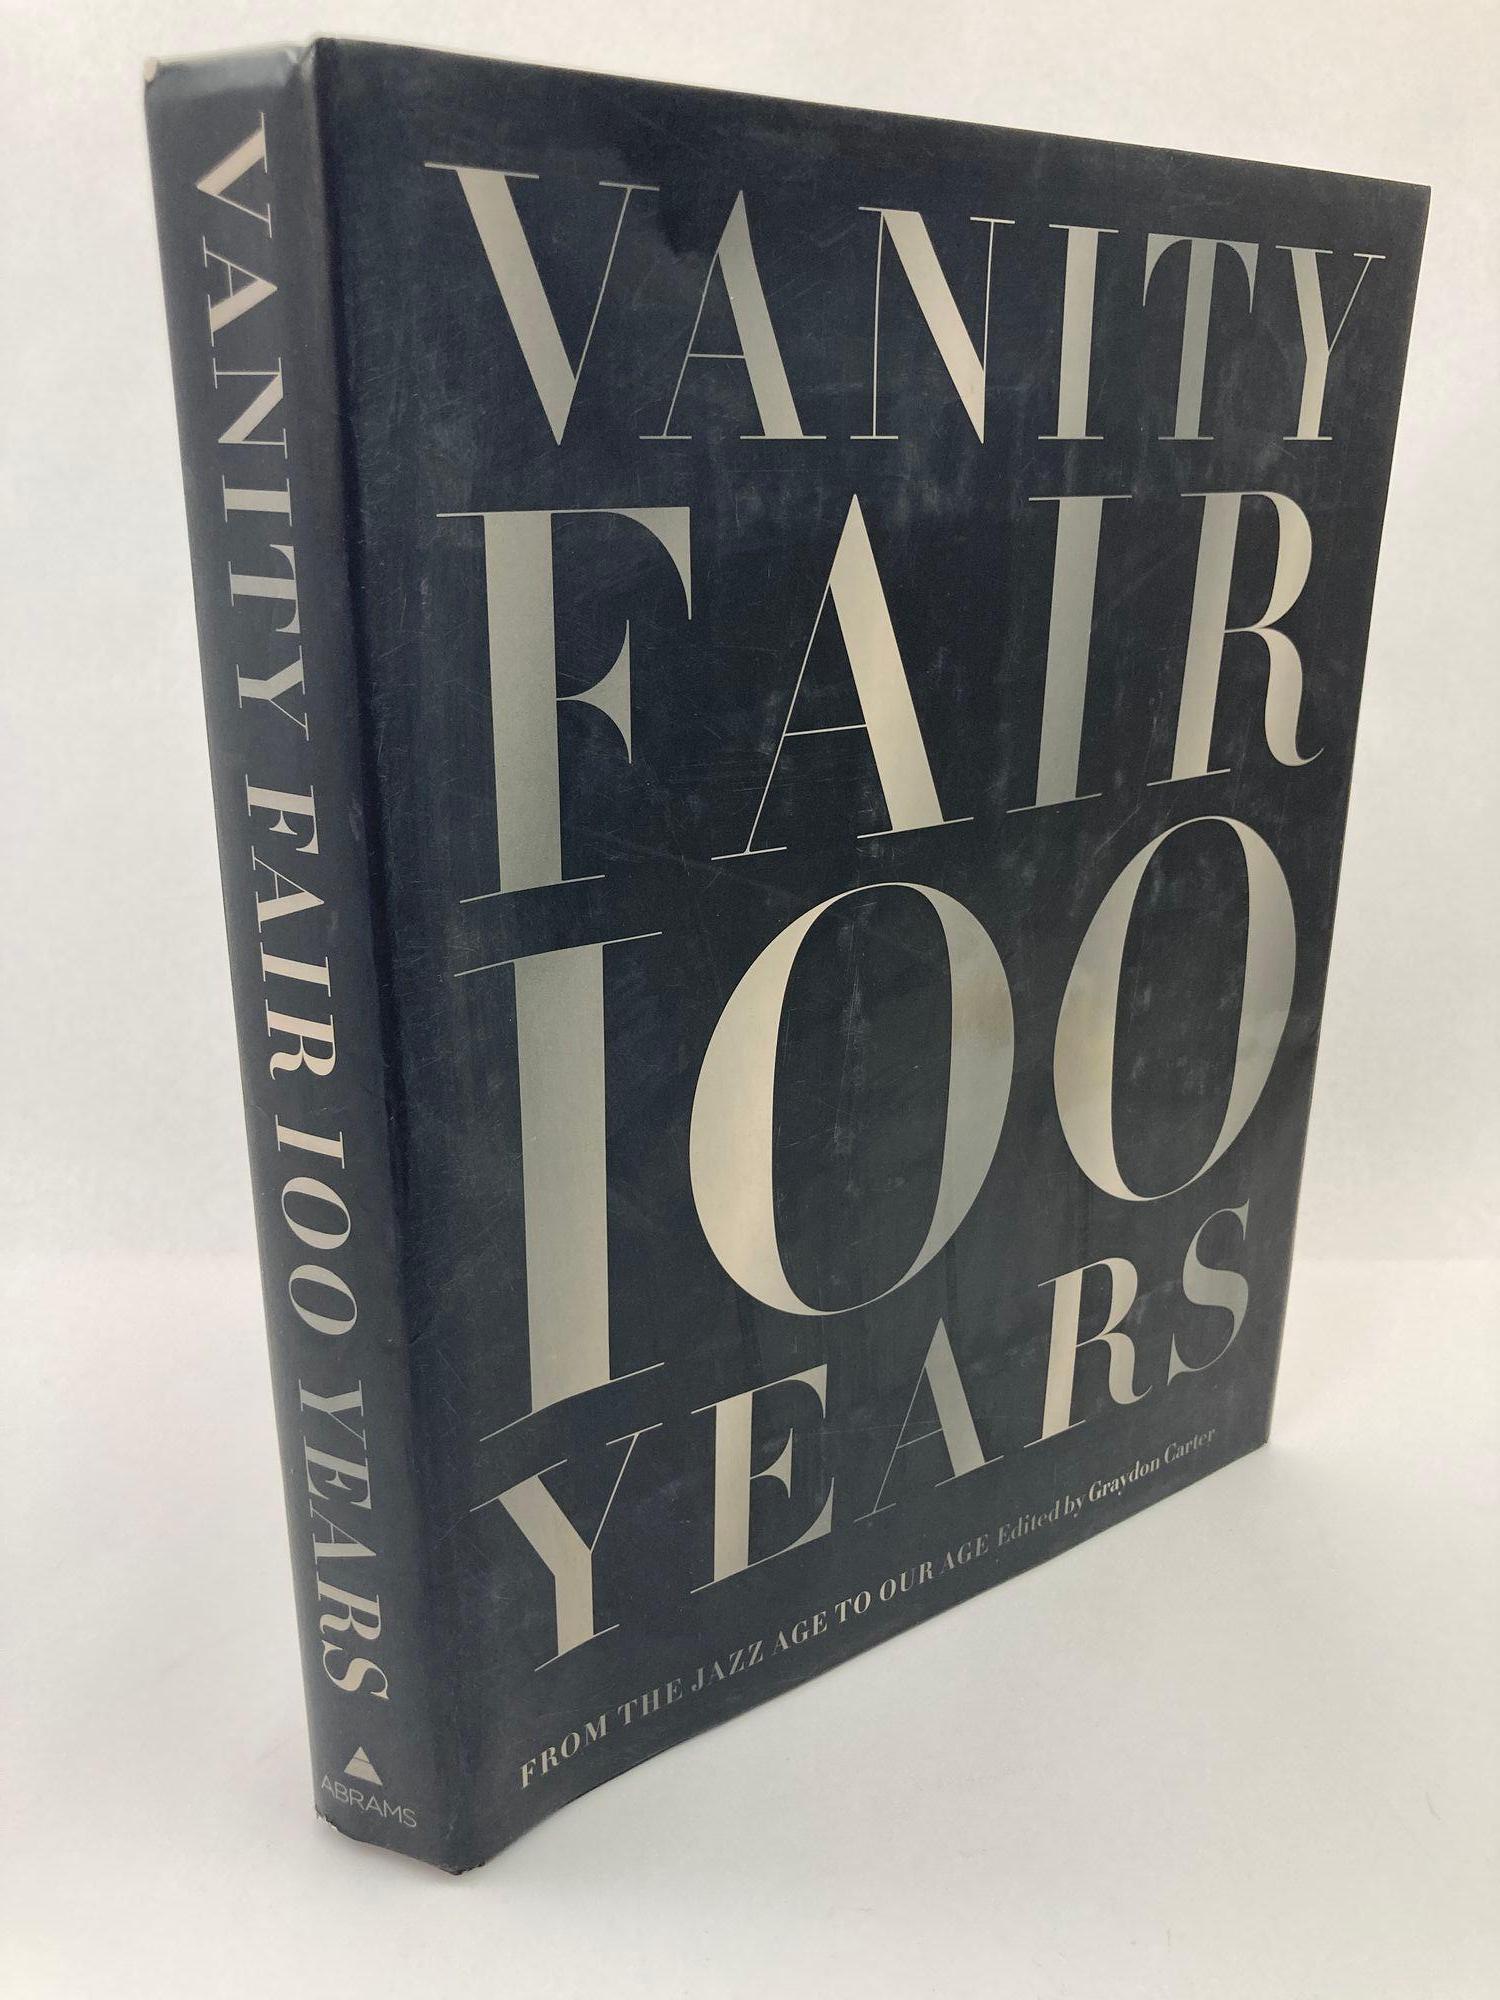 Vanity Fair: 100 Years, From the Jazz Age to Our Age, Graydon Carter, 2013.
Vanity Fair 100 Years showcases a century of personality and power, art and commerce, crisis and culture both highbrow and low.
In the sumptuous 384-page coffee table book,